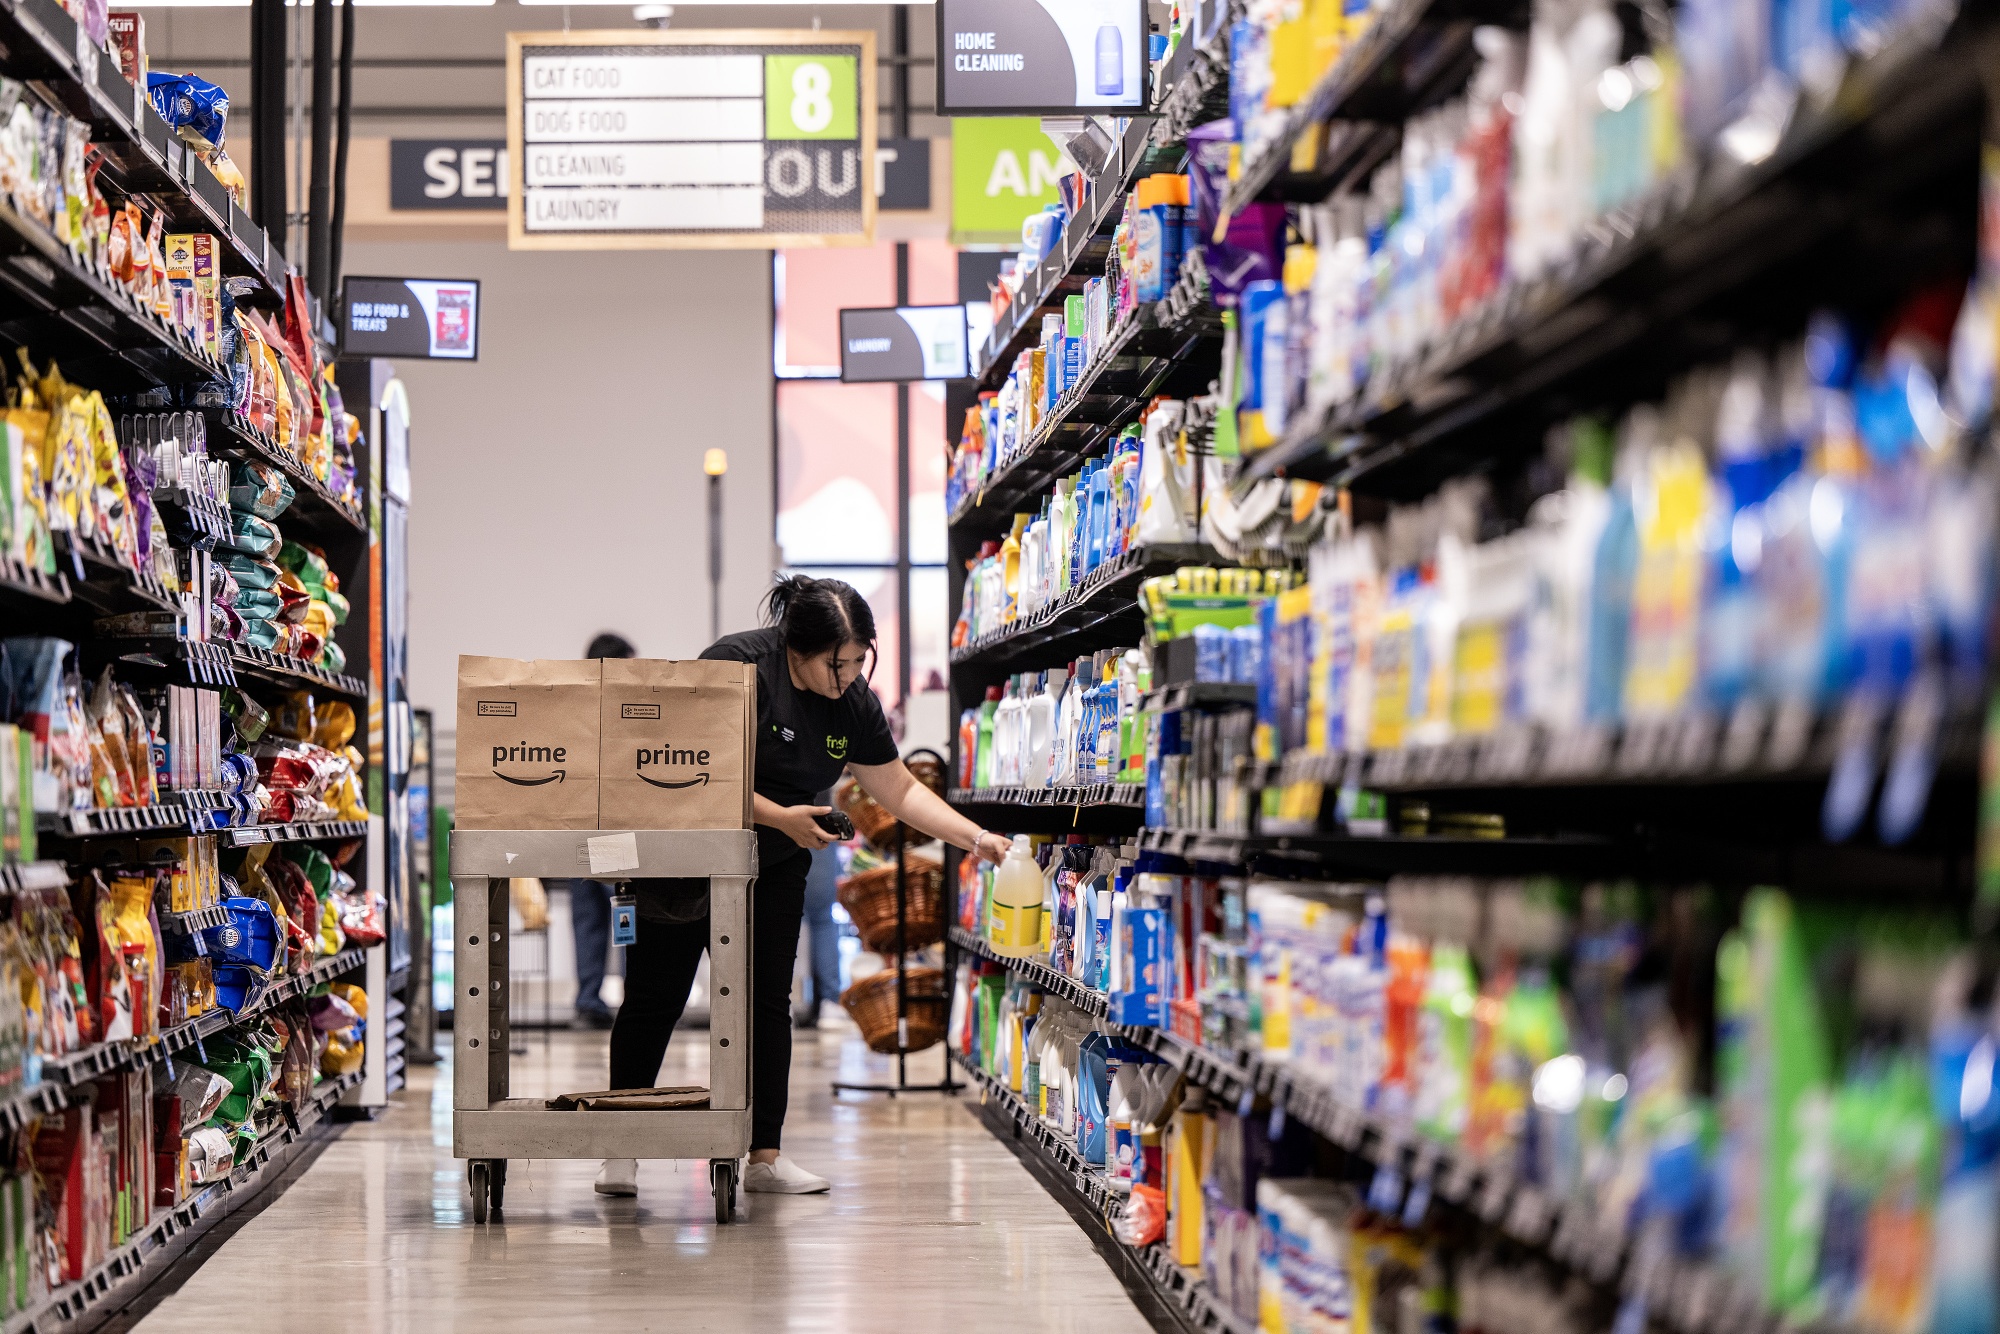 Expands US Grocery Delivery, Resumes Supermarket Openings - Bloomberg